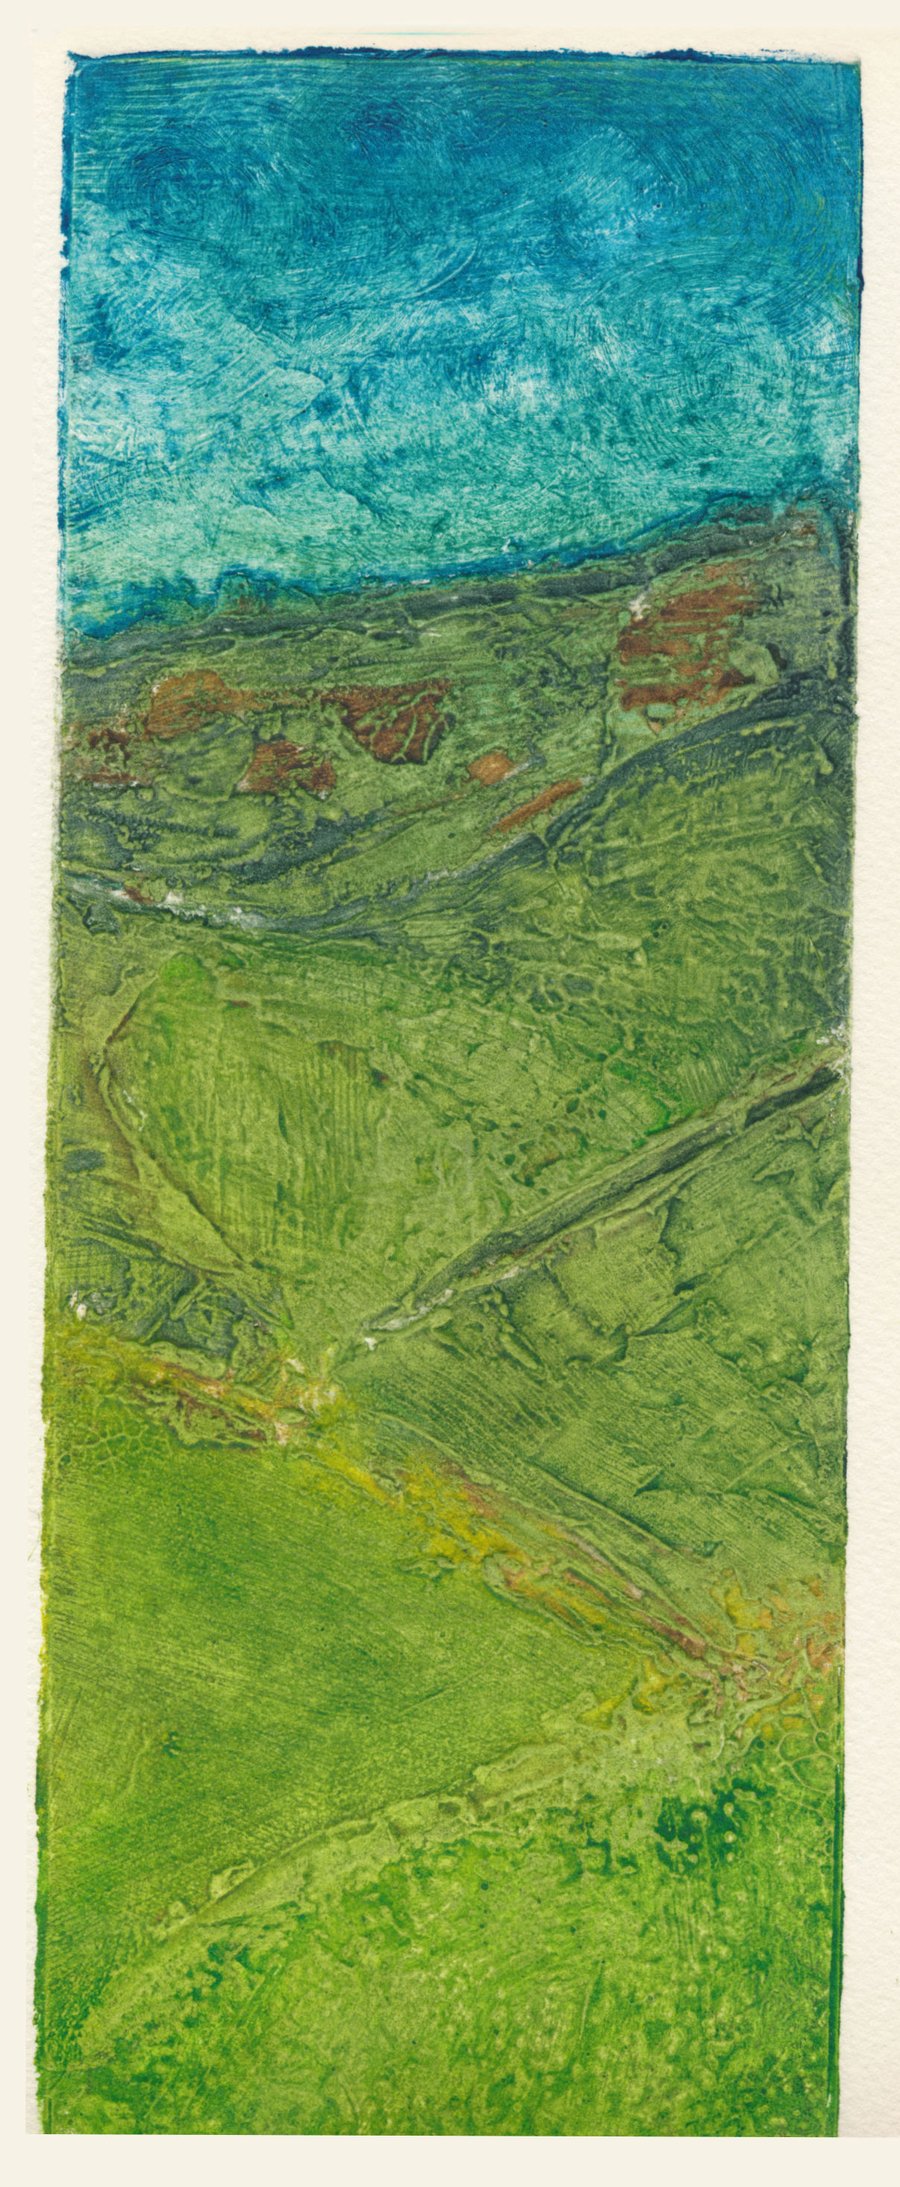 Transect I - limited edition collagraph print